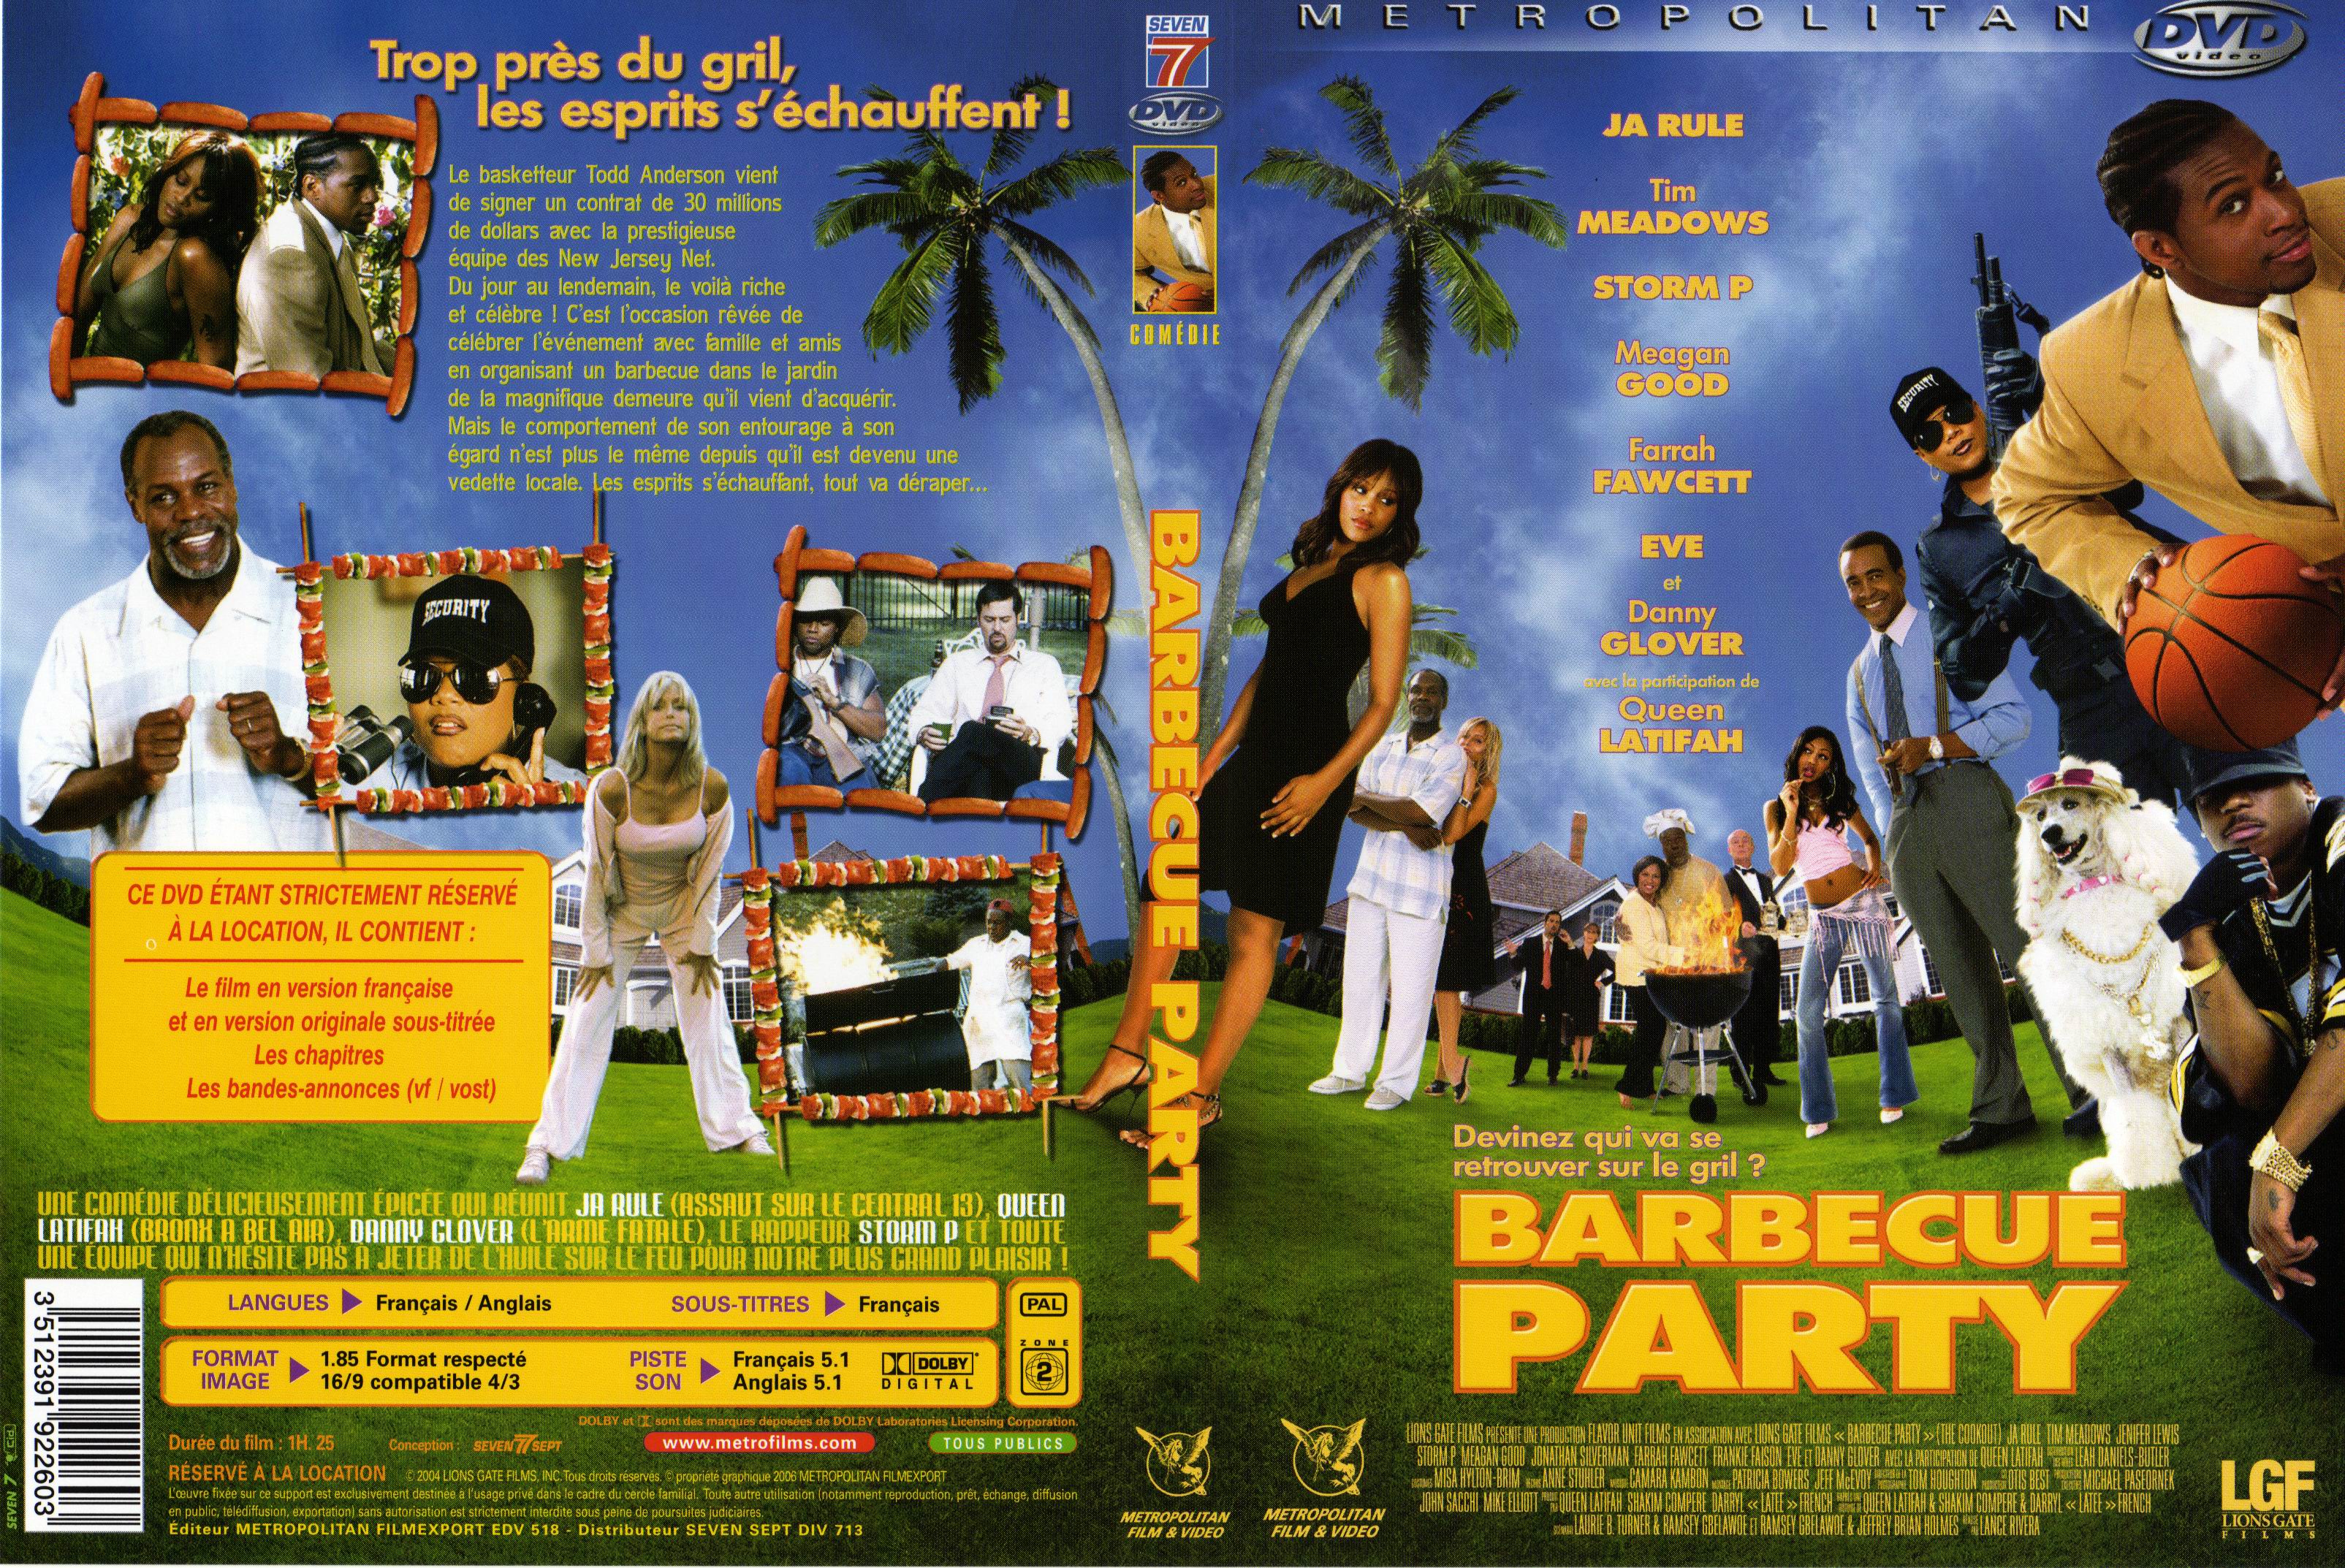 Jaquette DVD Barbecue party